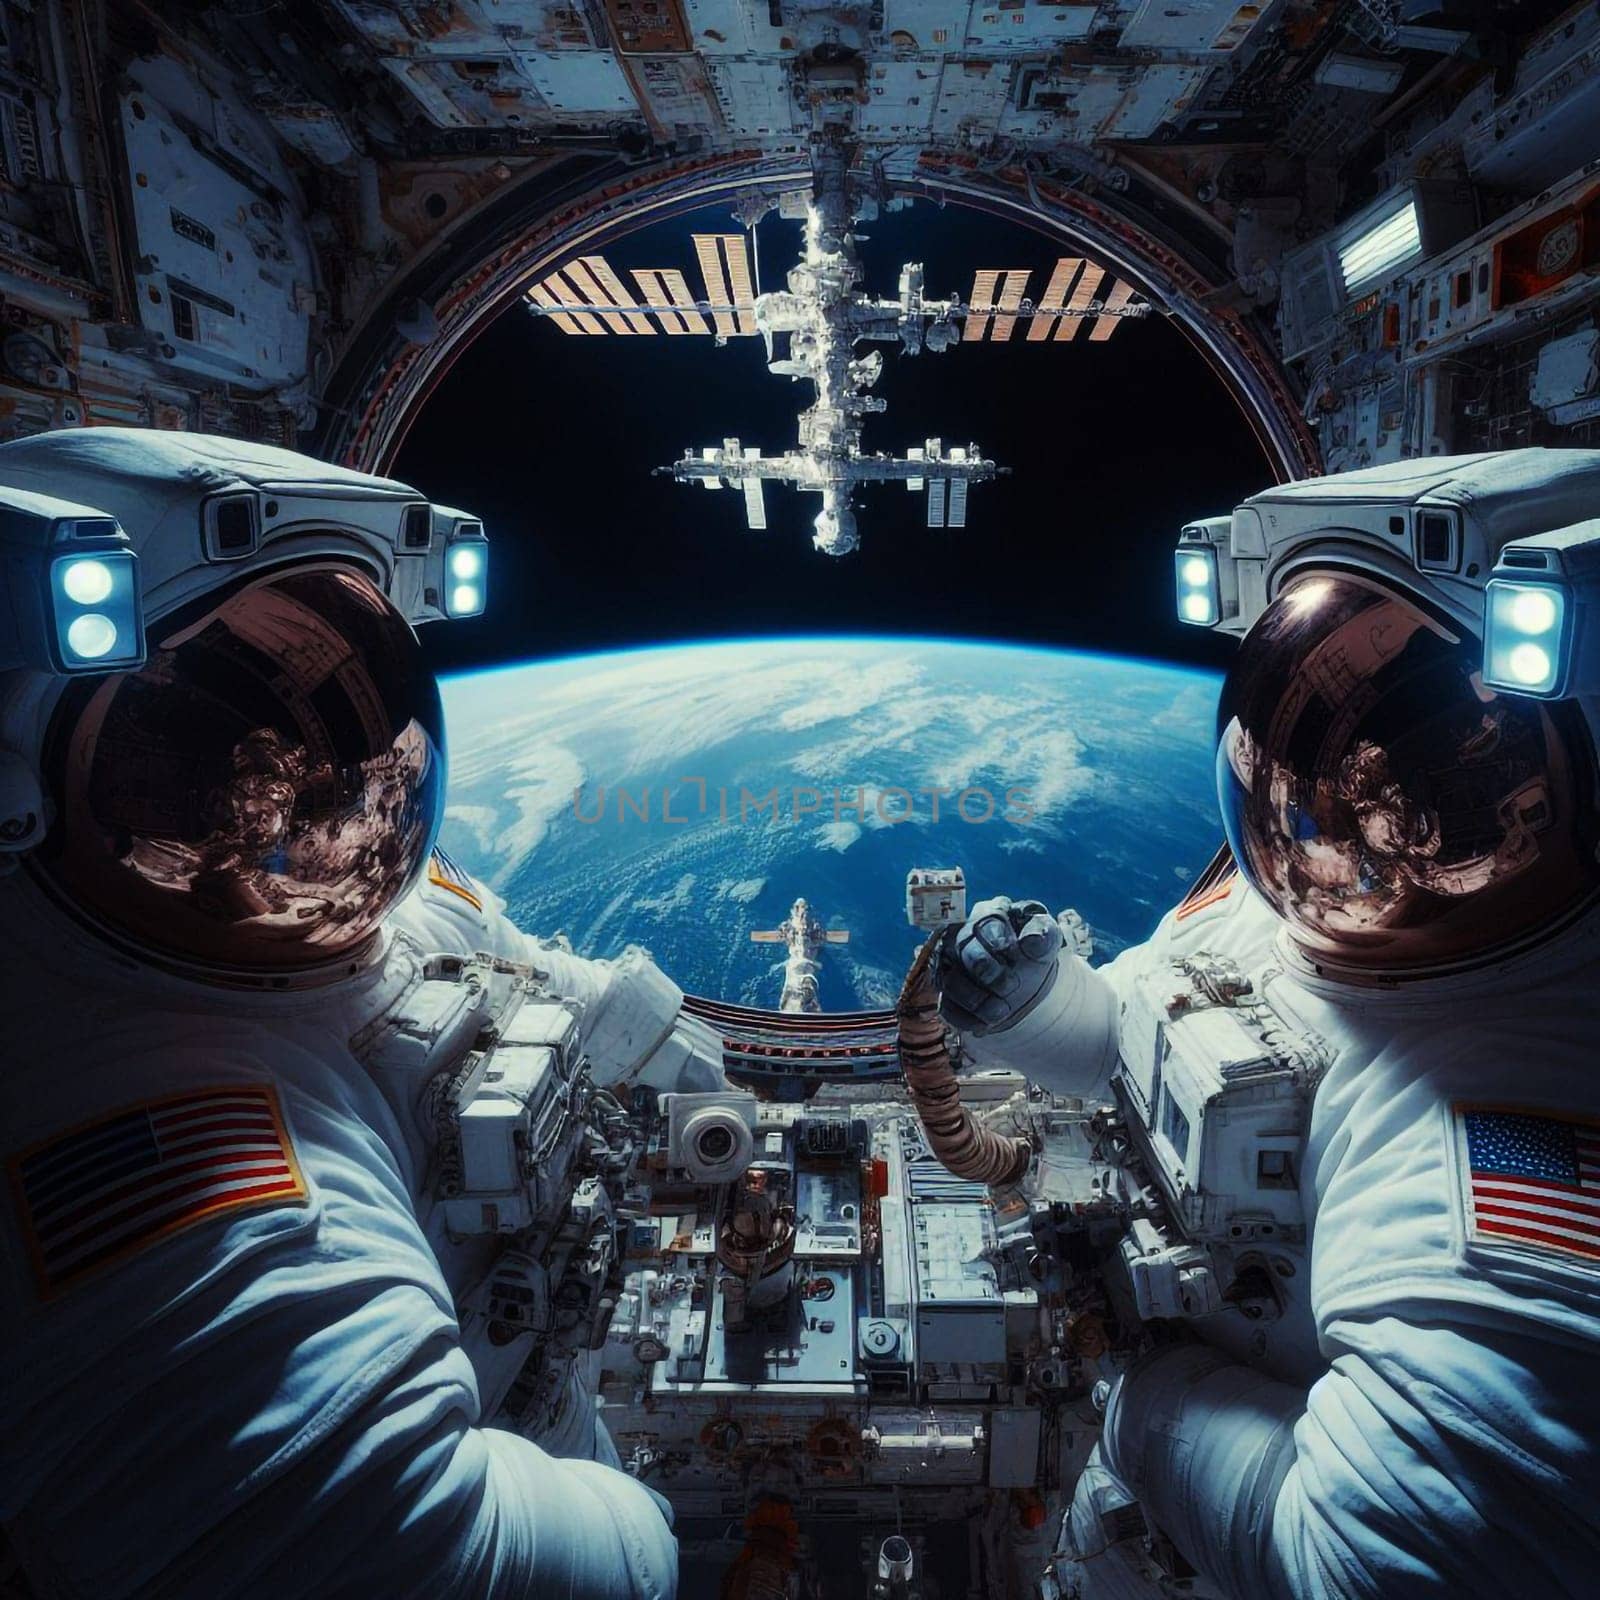 Two astronauts using control panel while orbiting around a planet in a spaceship.